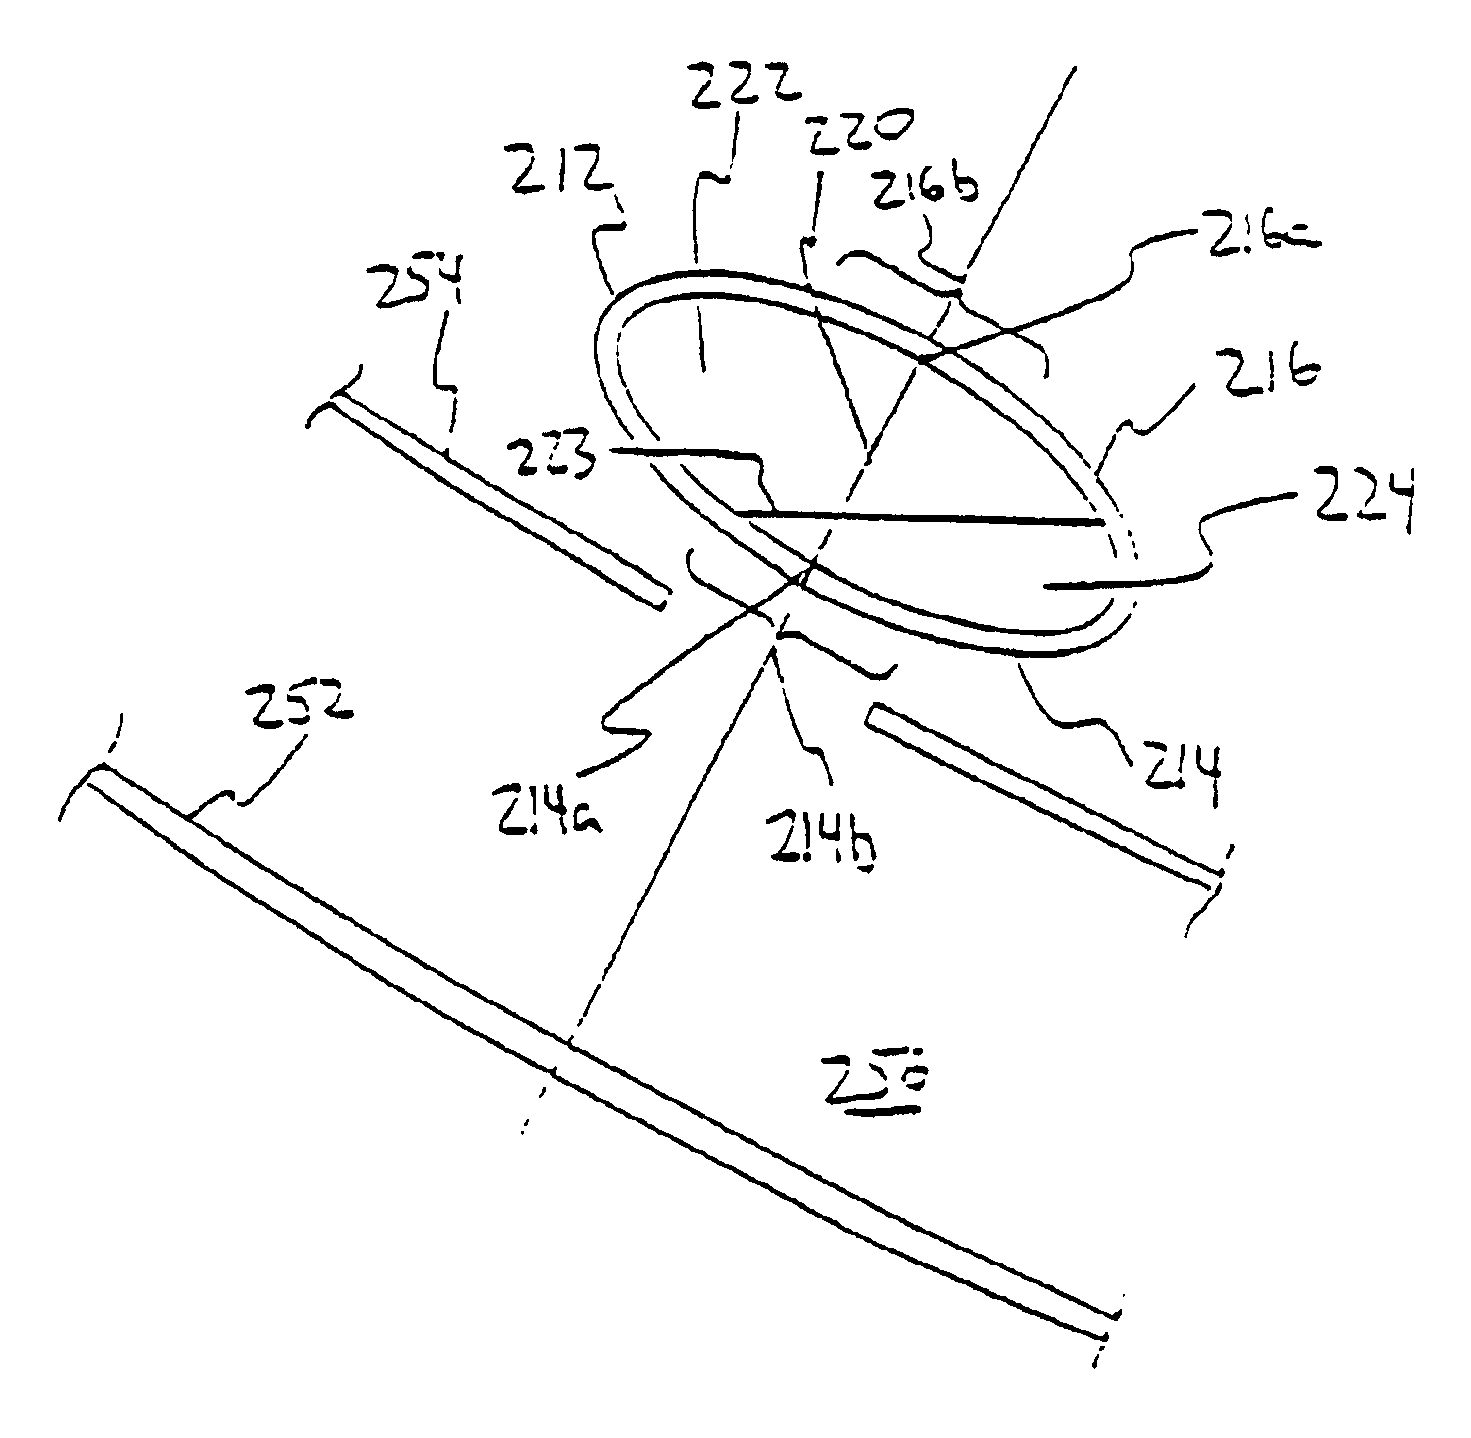 Multi-focal intraocular lens, and methods for making and using same